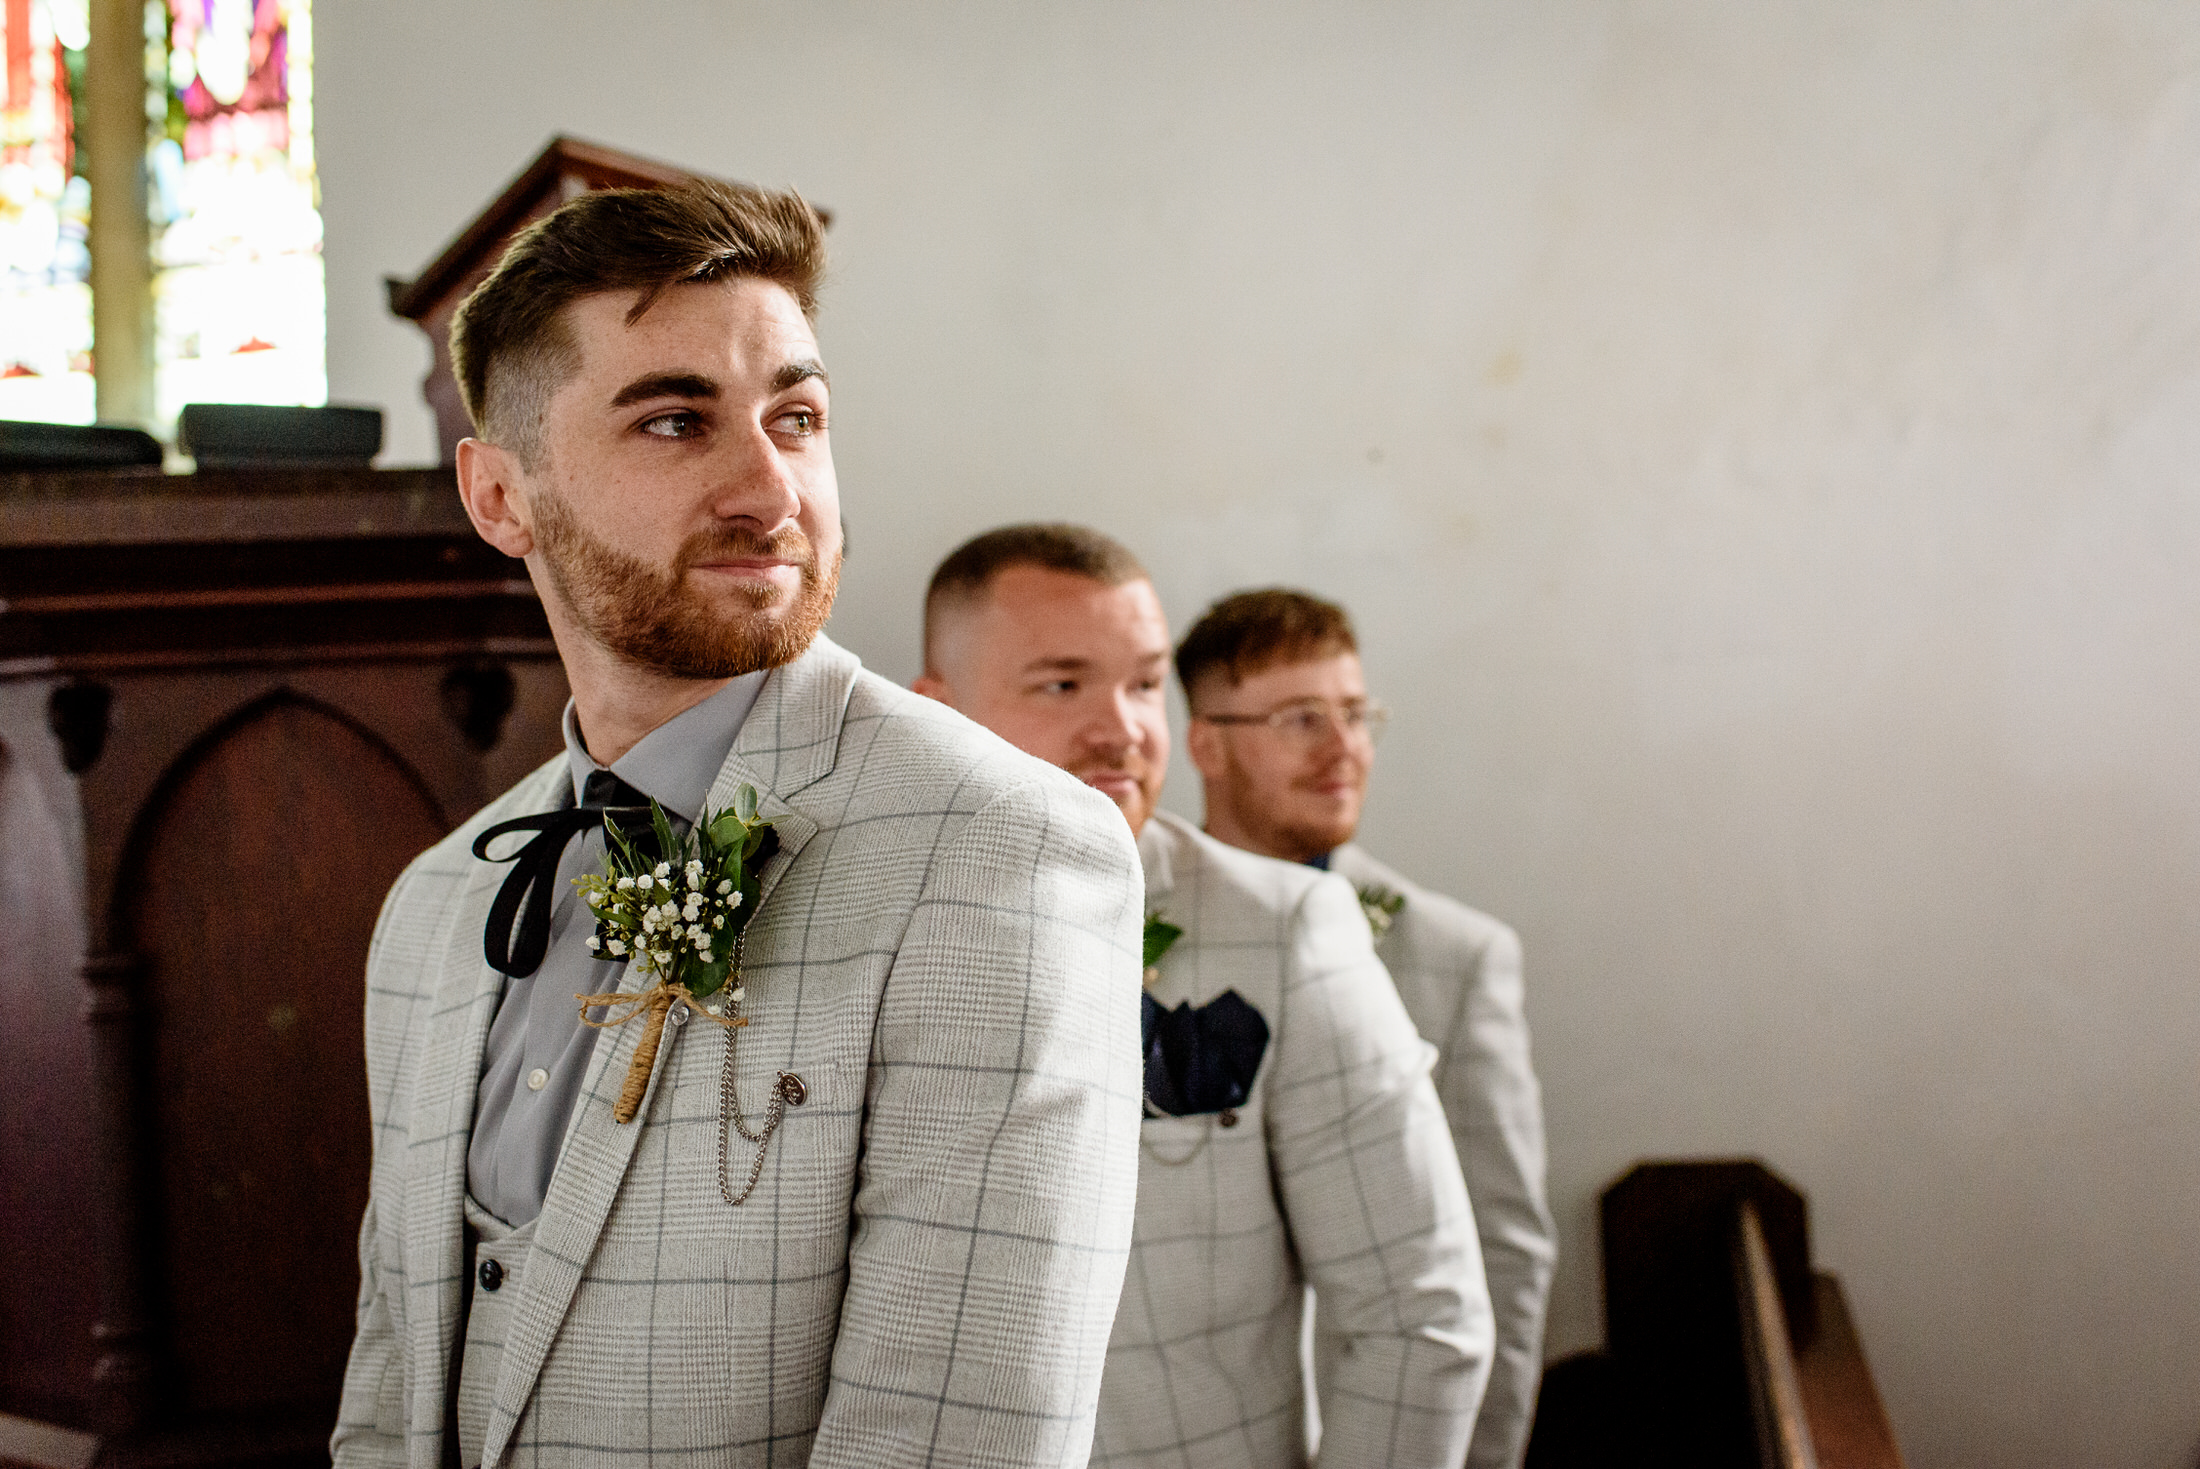 A group of groomsmen standing in a church during a wedding.